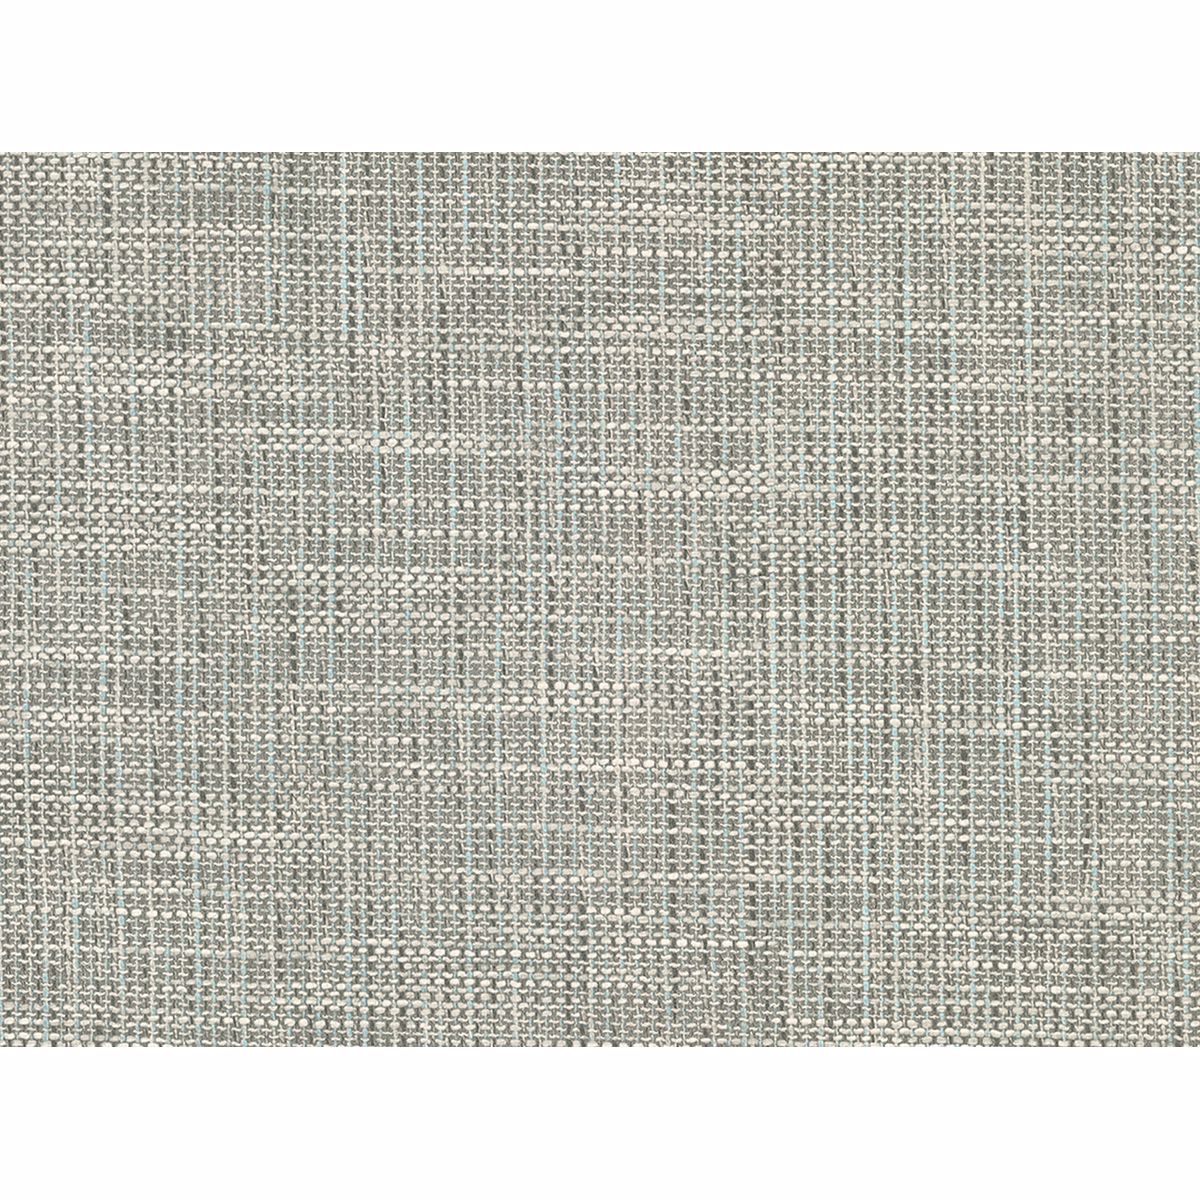 2829-82065 - In the Loop Multicolor Faux Grasscloth Wallpaper - by A ...